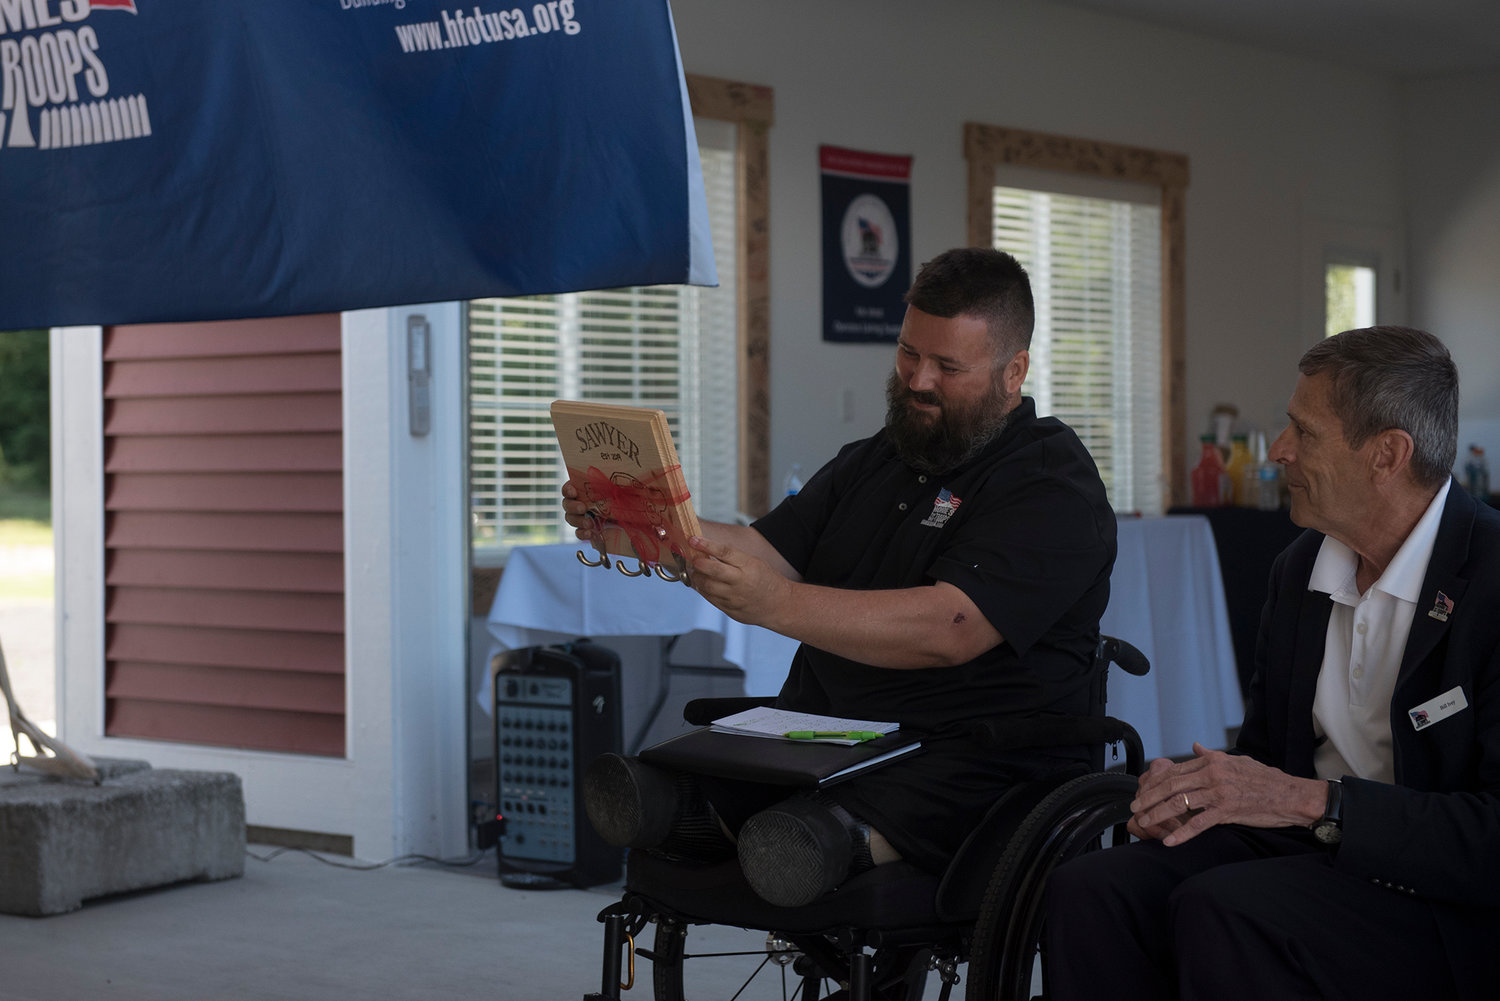 U.S. Army Sgt. Jereme Sawyer, left, shortly after being presented a key rack for his new home in Tenino by Homes For Our Troops Executive Director Bill Ivey, right.